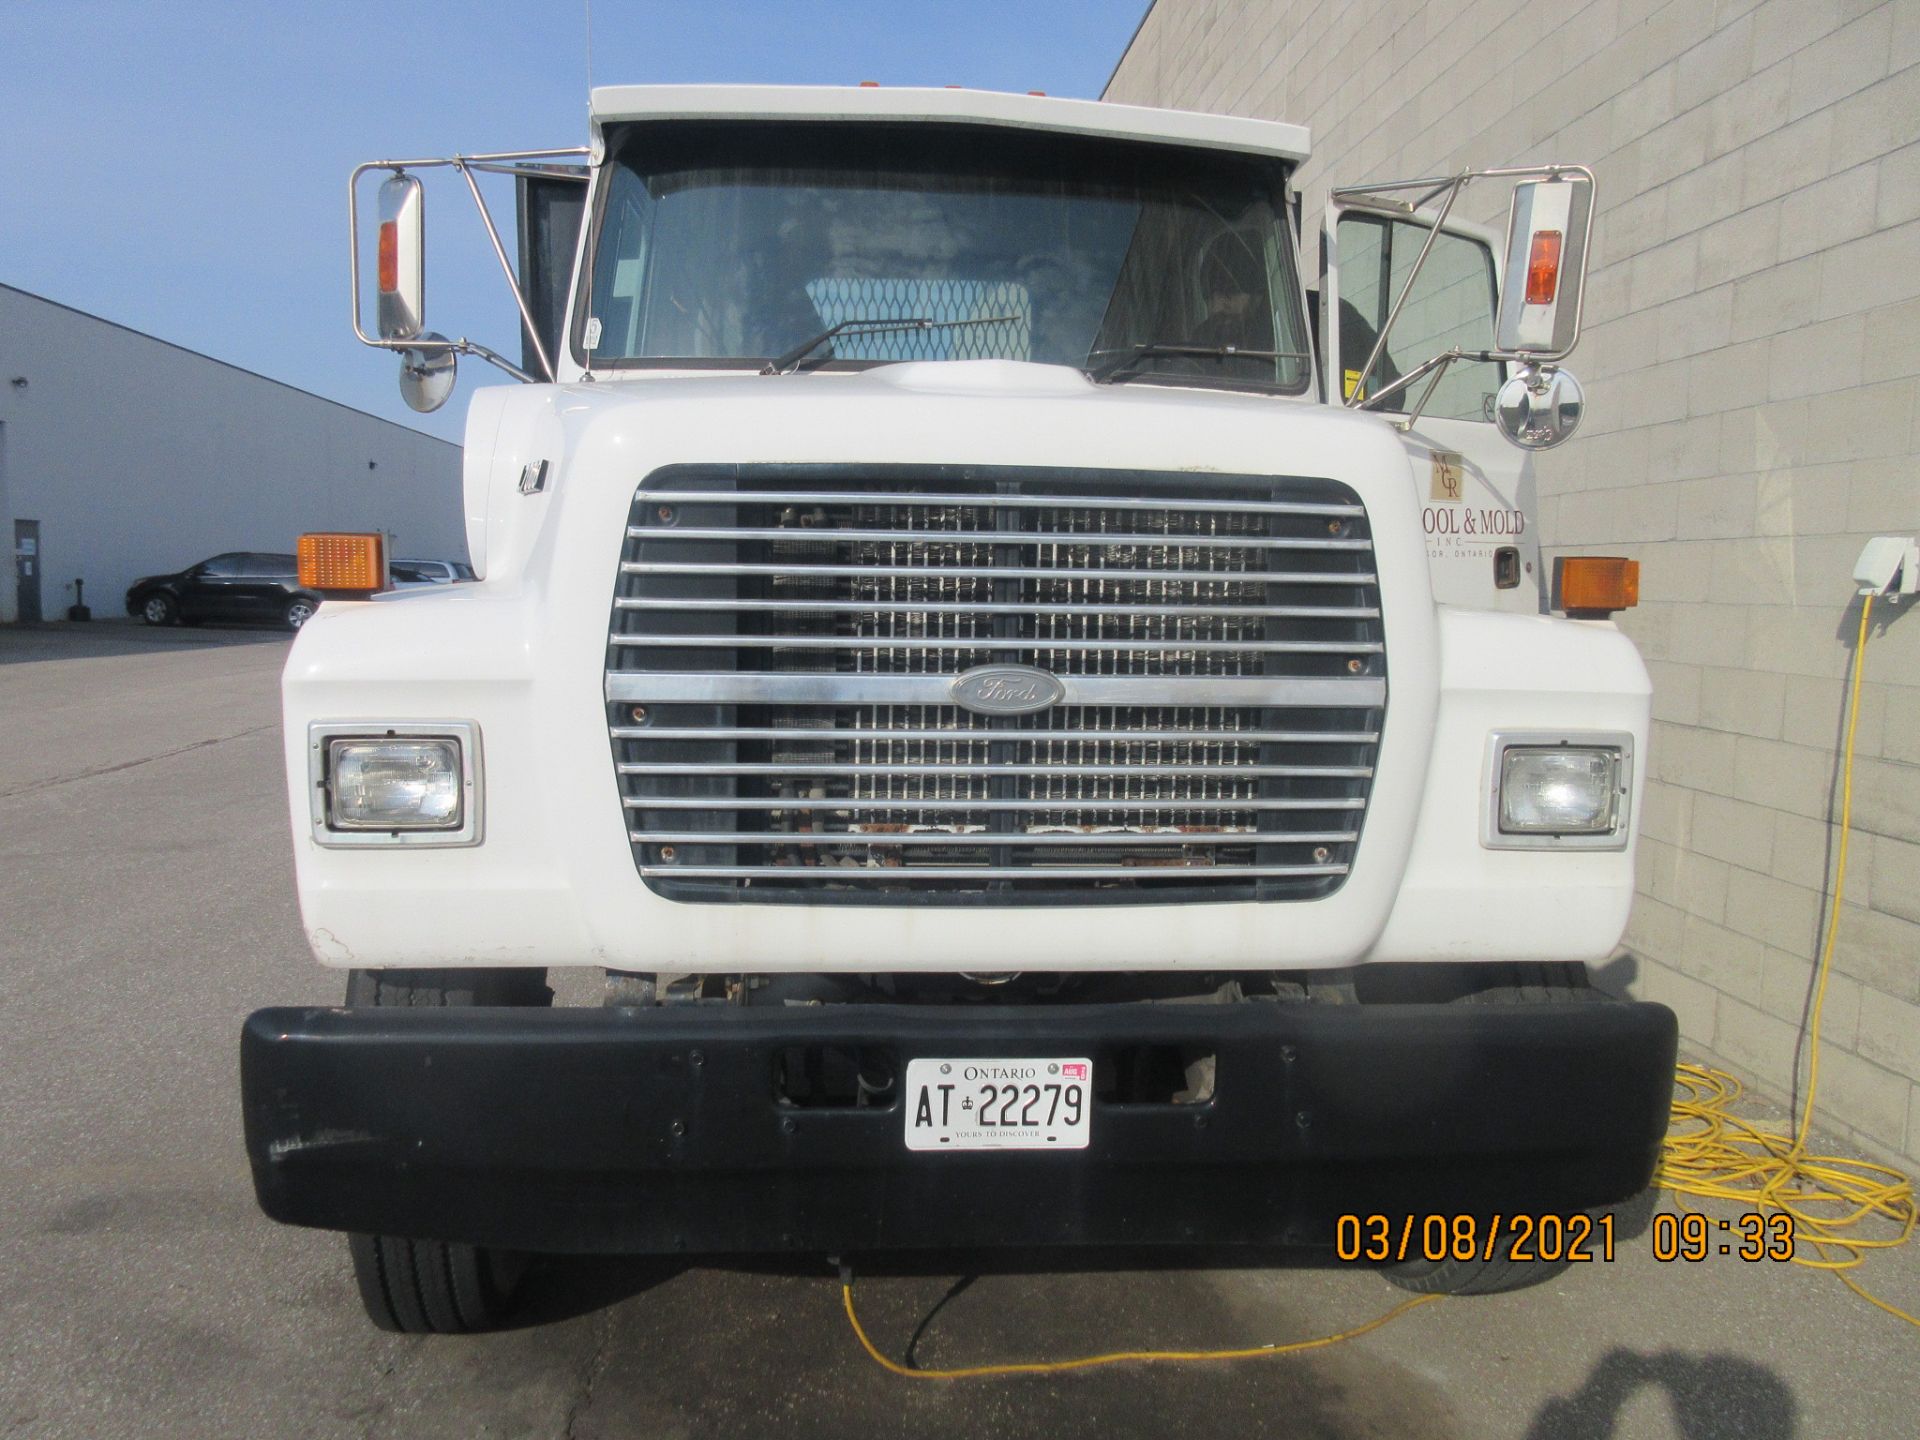 FORD (1996) L7000 SINGLE AXEL MANUAL FLATBED TRUCK WITH 346,631 KMS. VIN # 1FDPR72C5TVA32210